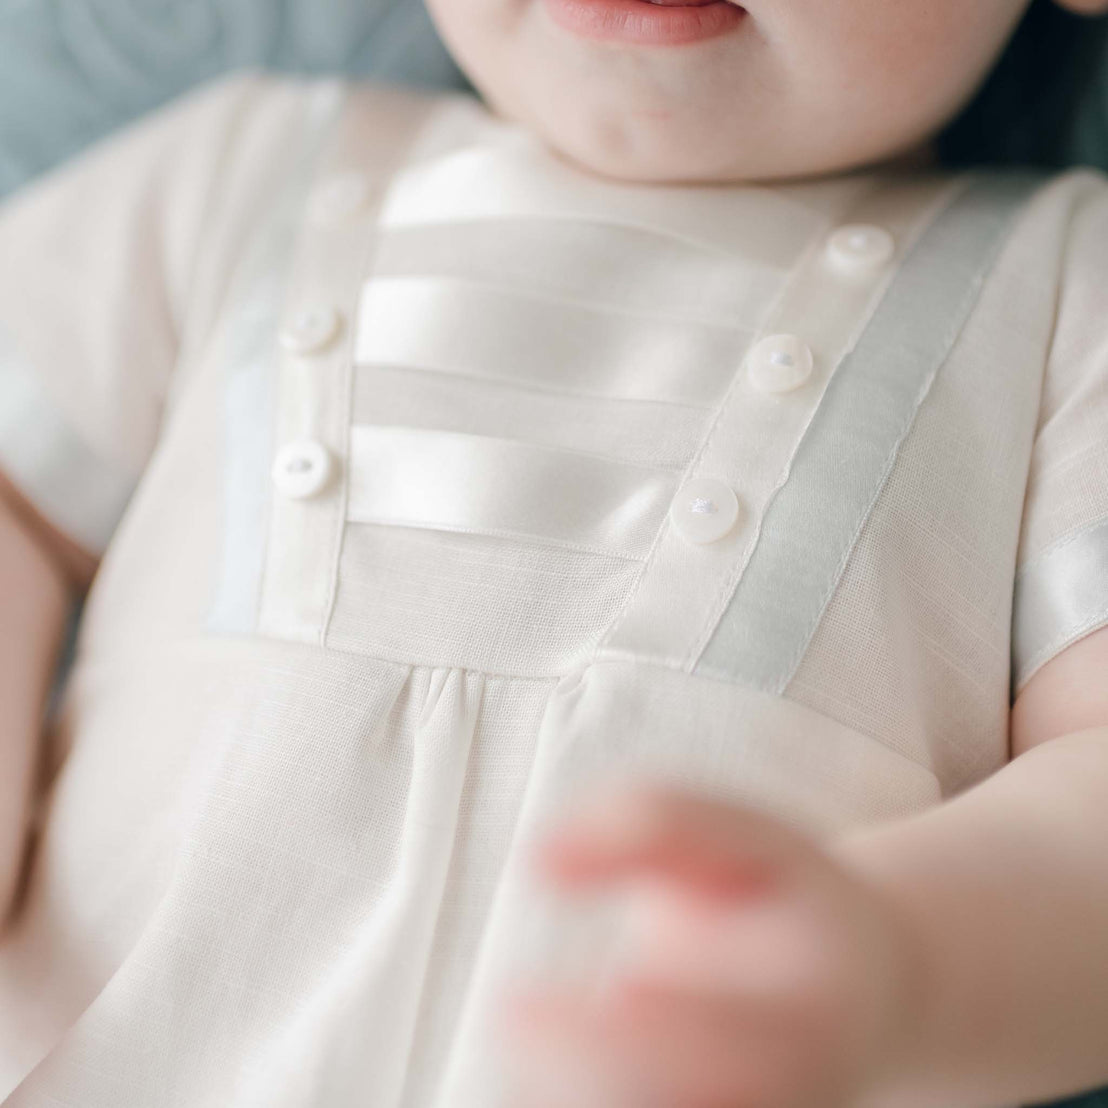 Close-up of a baby wearing an Owen Linen Christening Romper with satin stripes and small buttons. The focus is on the upper part of the outfit, akin to a Christening day outfit, and the baby's face is partially visible, showing the chin and lips. The baby's arm is out of focus in the foreground.